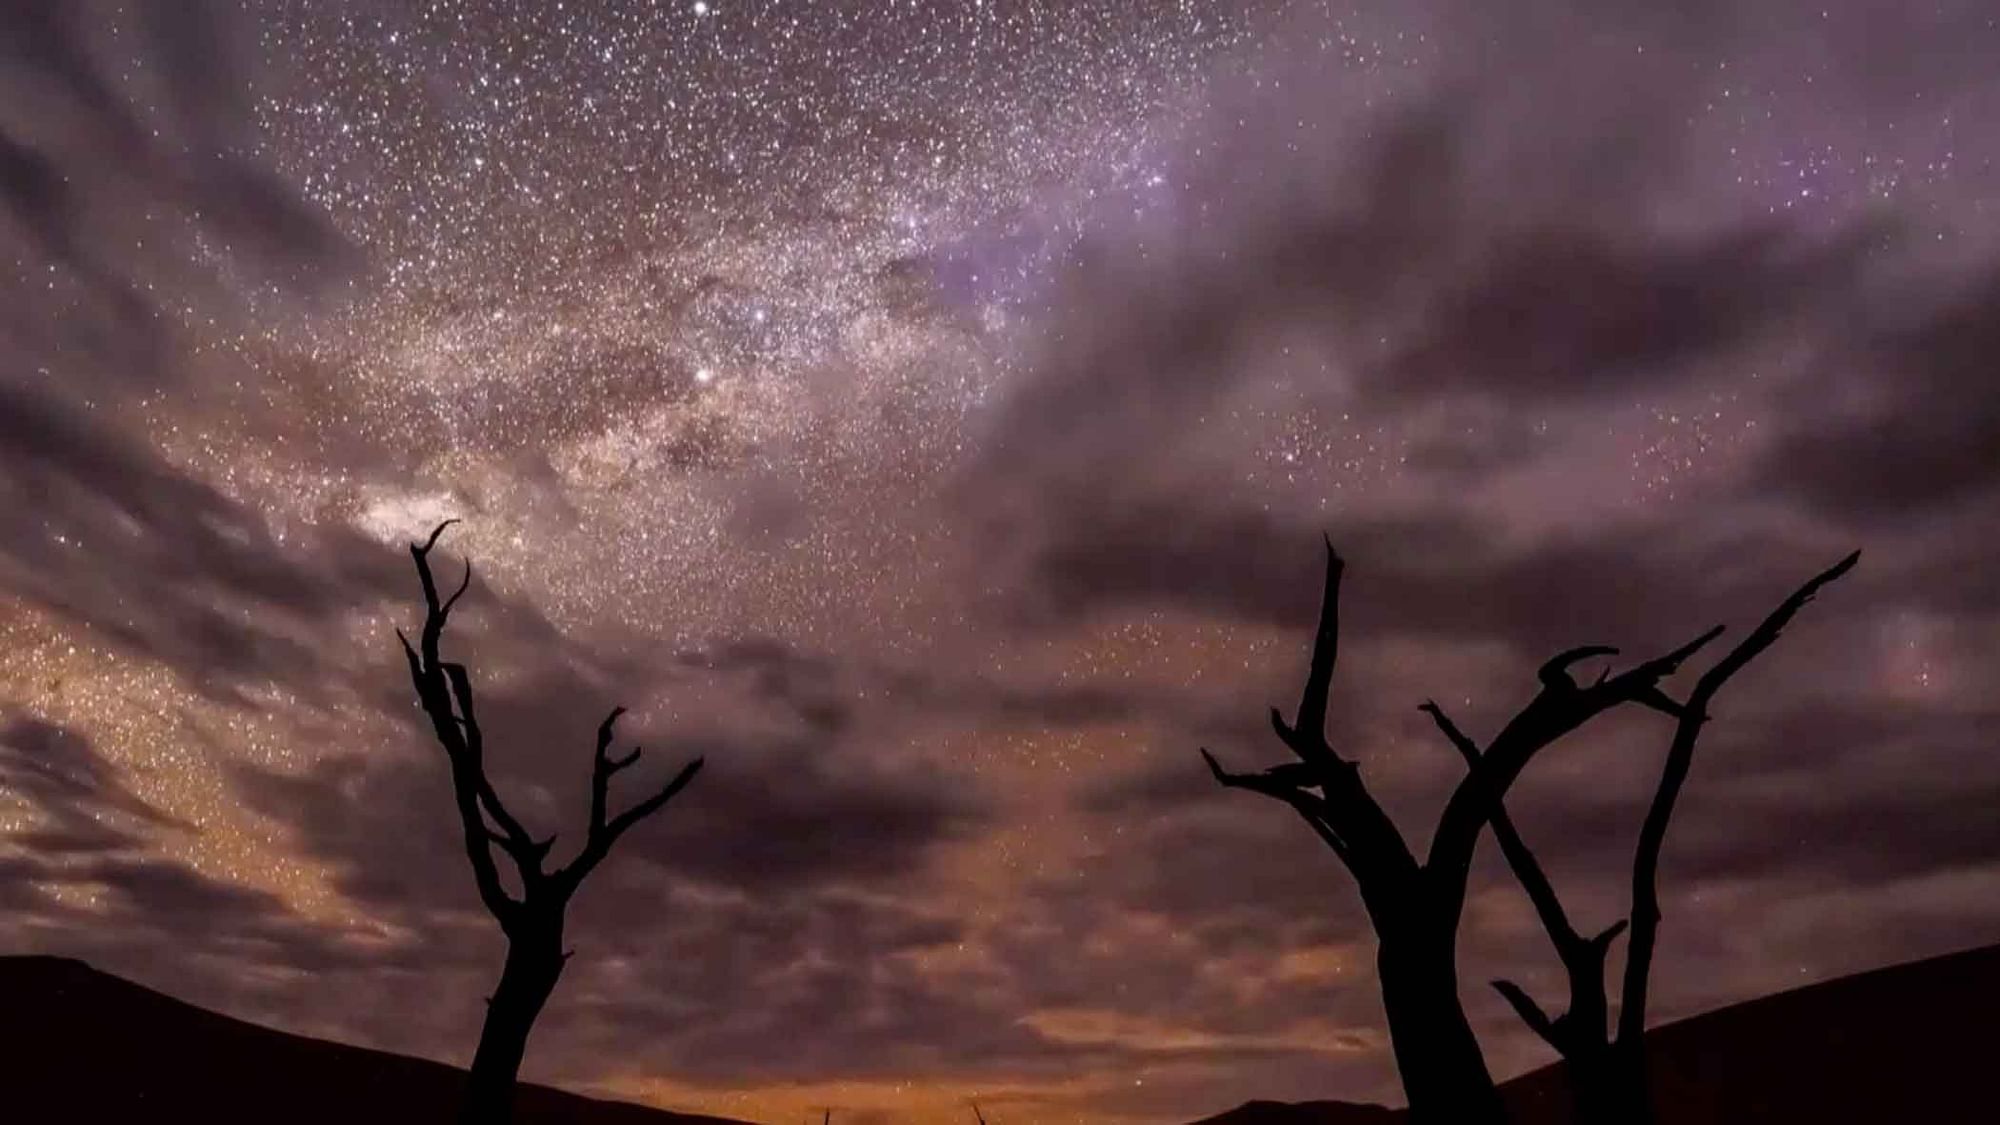 A still from the incredible timelapse captured in the Namib desert. (Photo Courtesy: AP Screegrab)&nbsp;